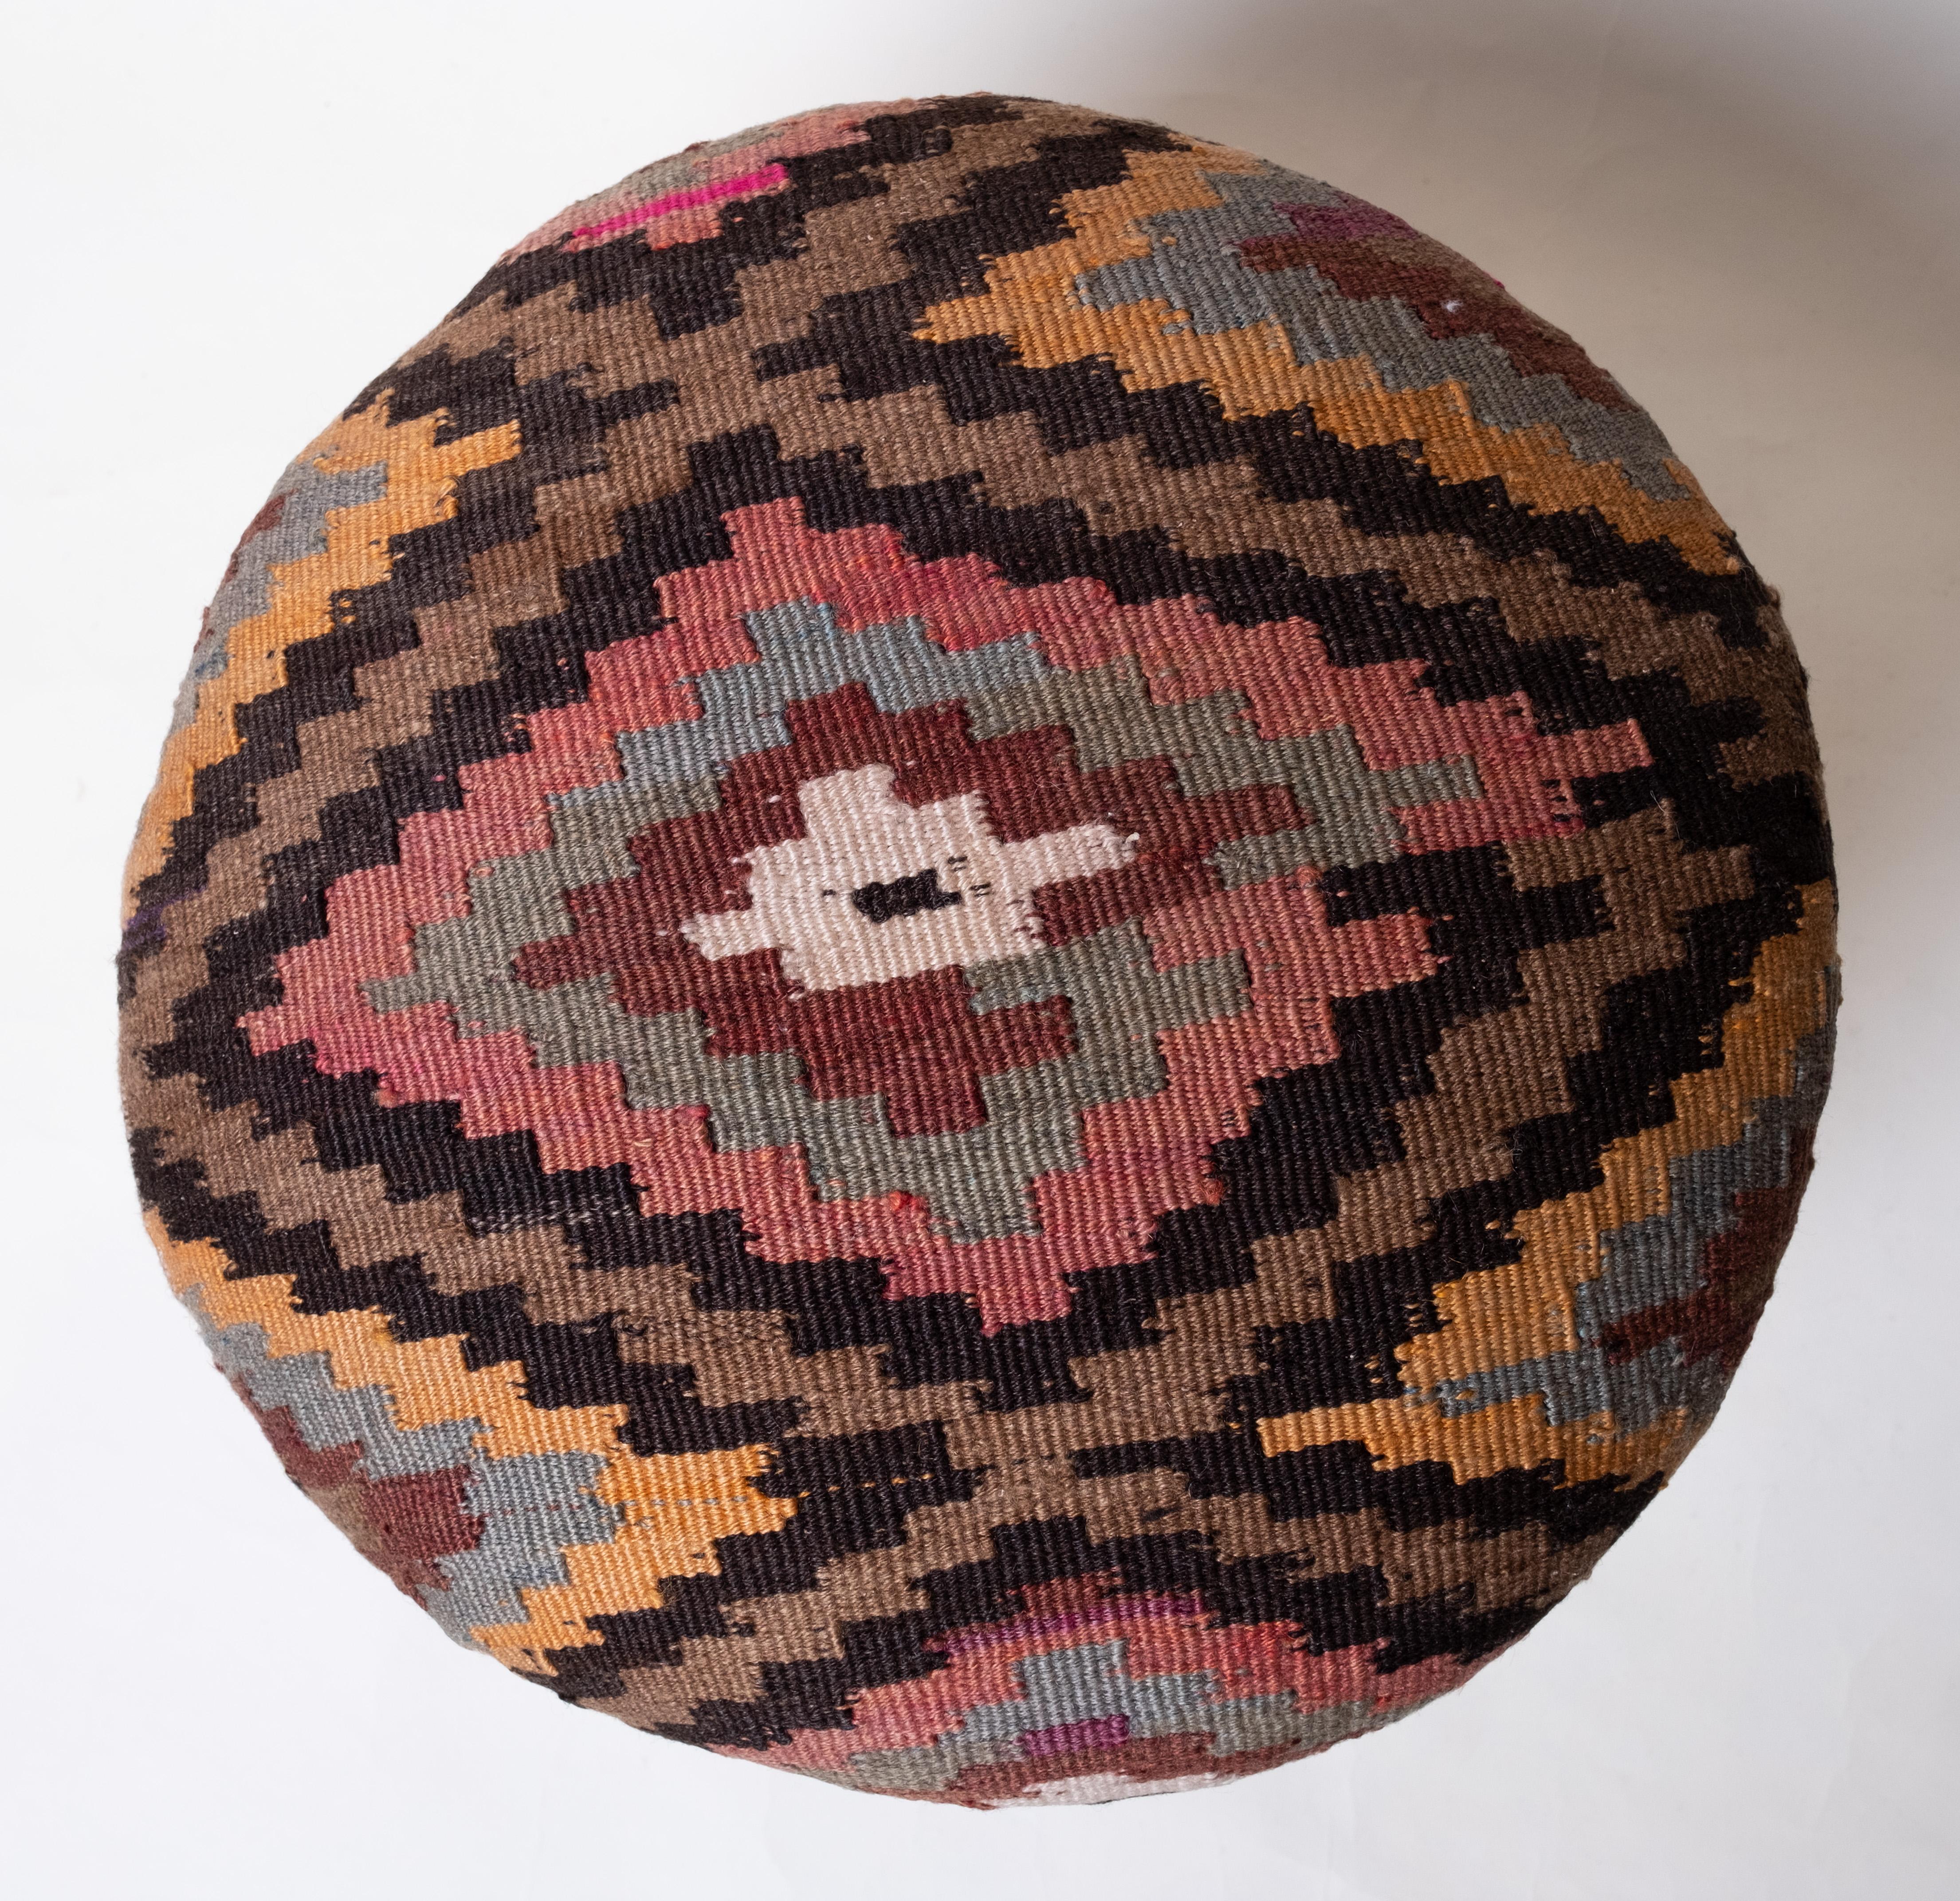 We made an oak wood ottoman using the undamaged part of the precious and high-quality old & antique kilims that cannot be repaired as a whole. Like a painting, a part of the scenery is cut out from a kilim, and even several covers cut out from the